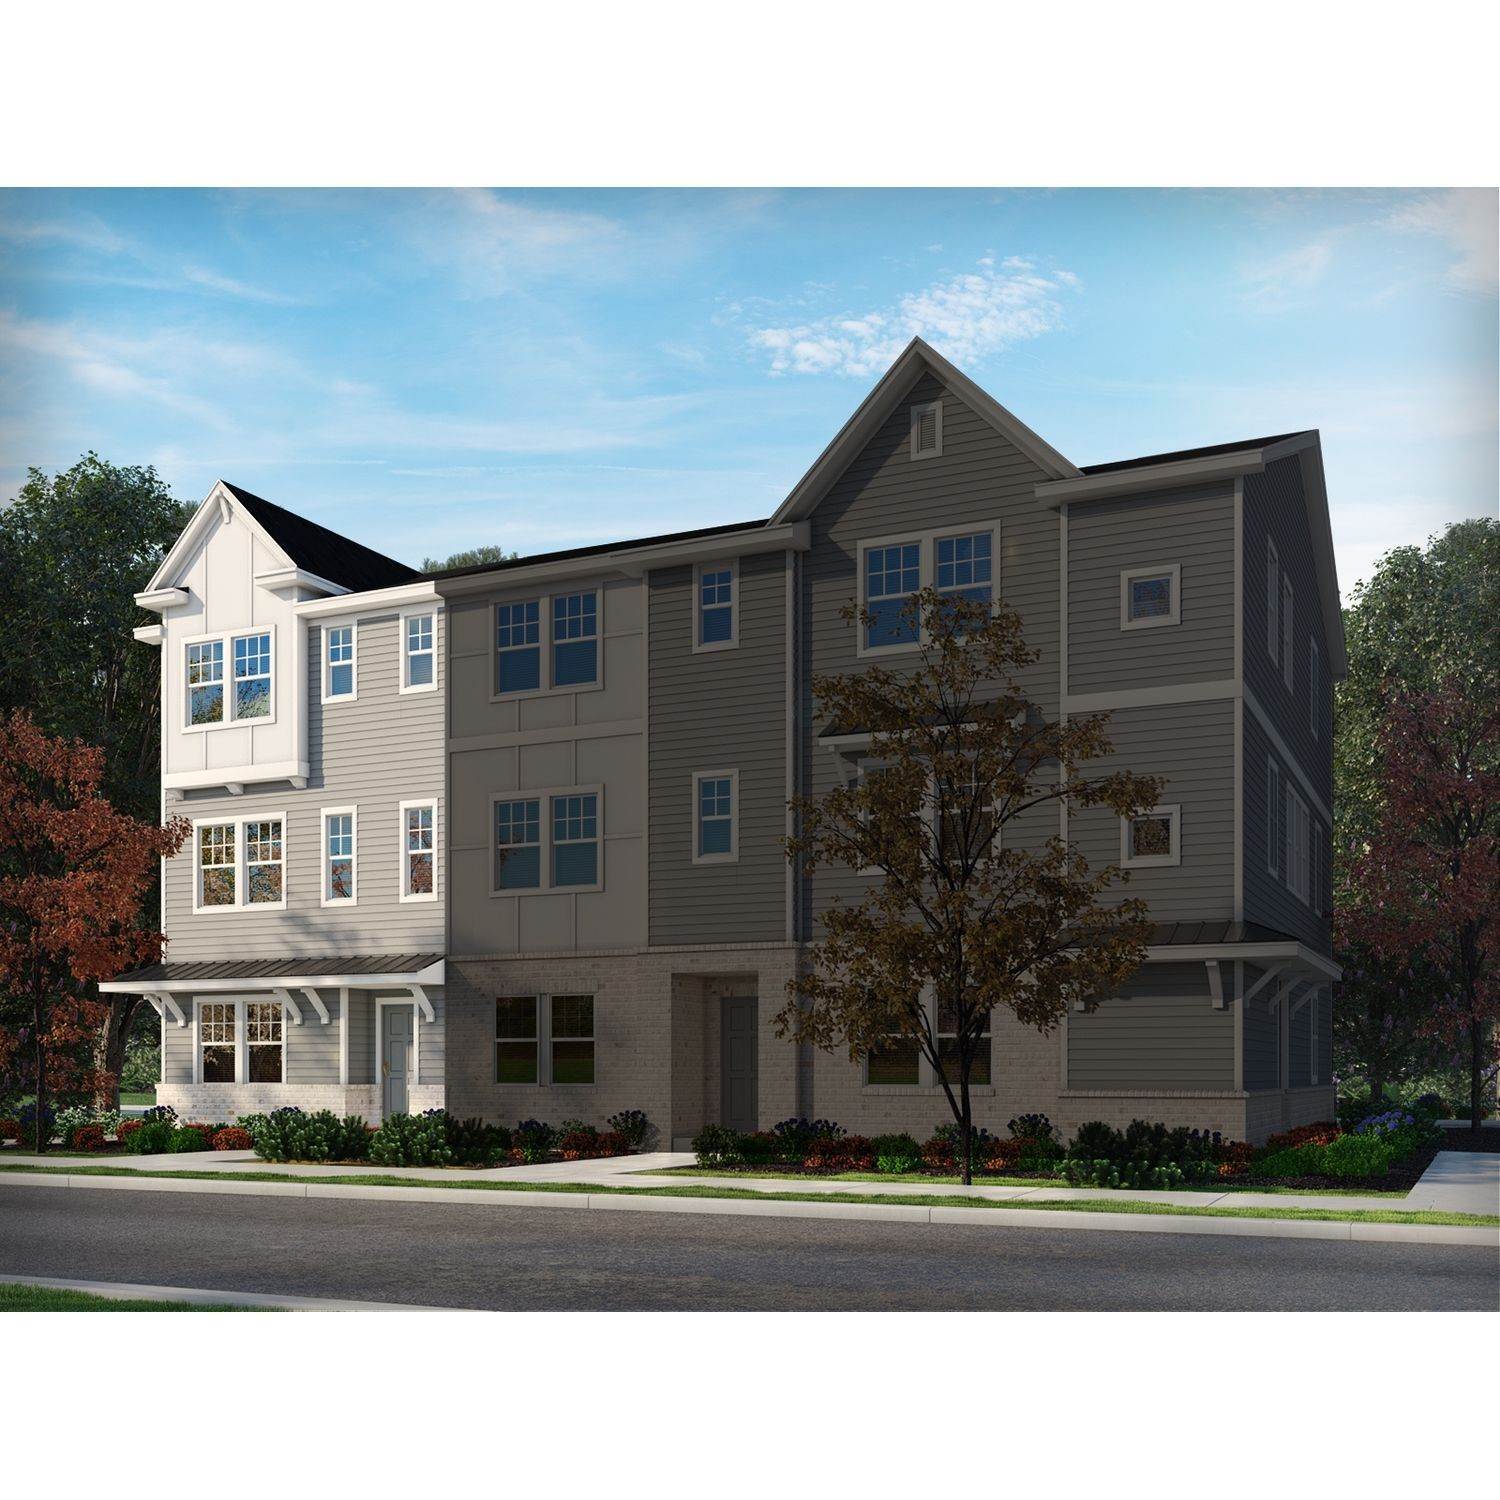 Single Family for Sale at Charlotte, NC 28217